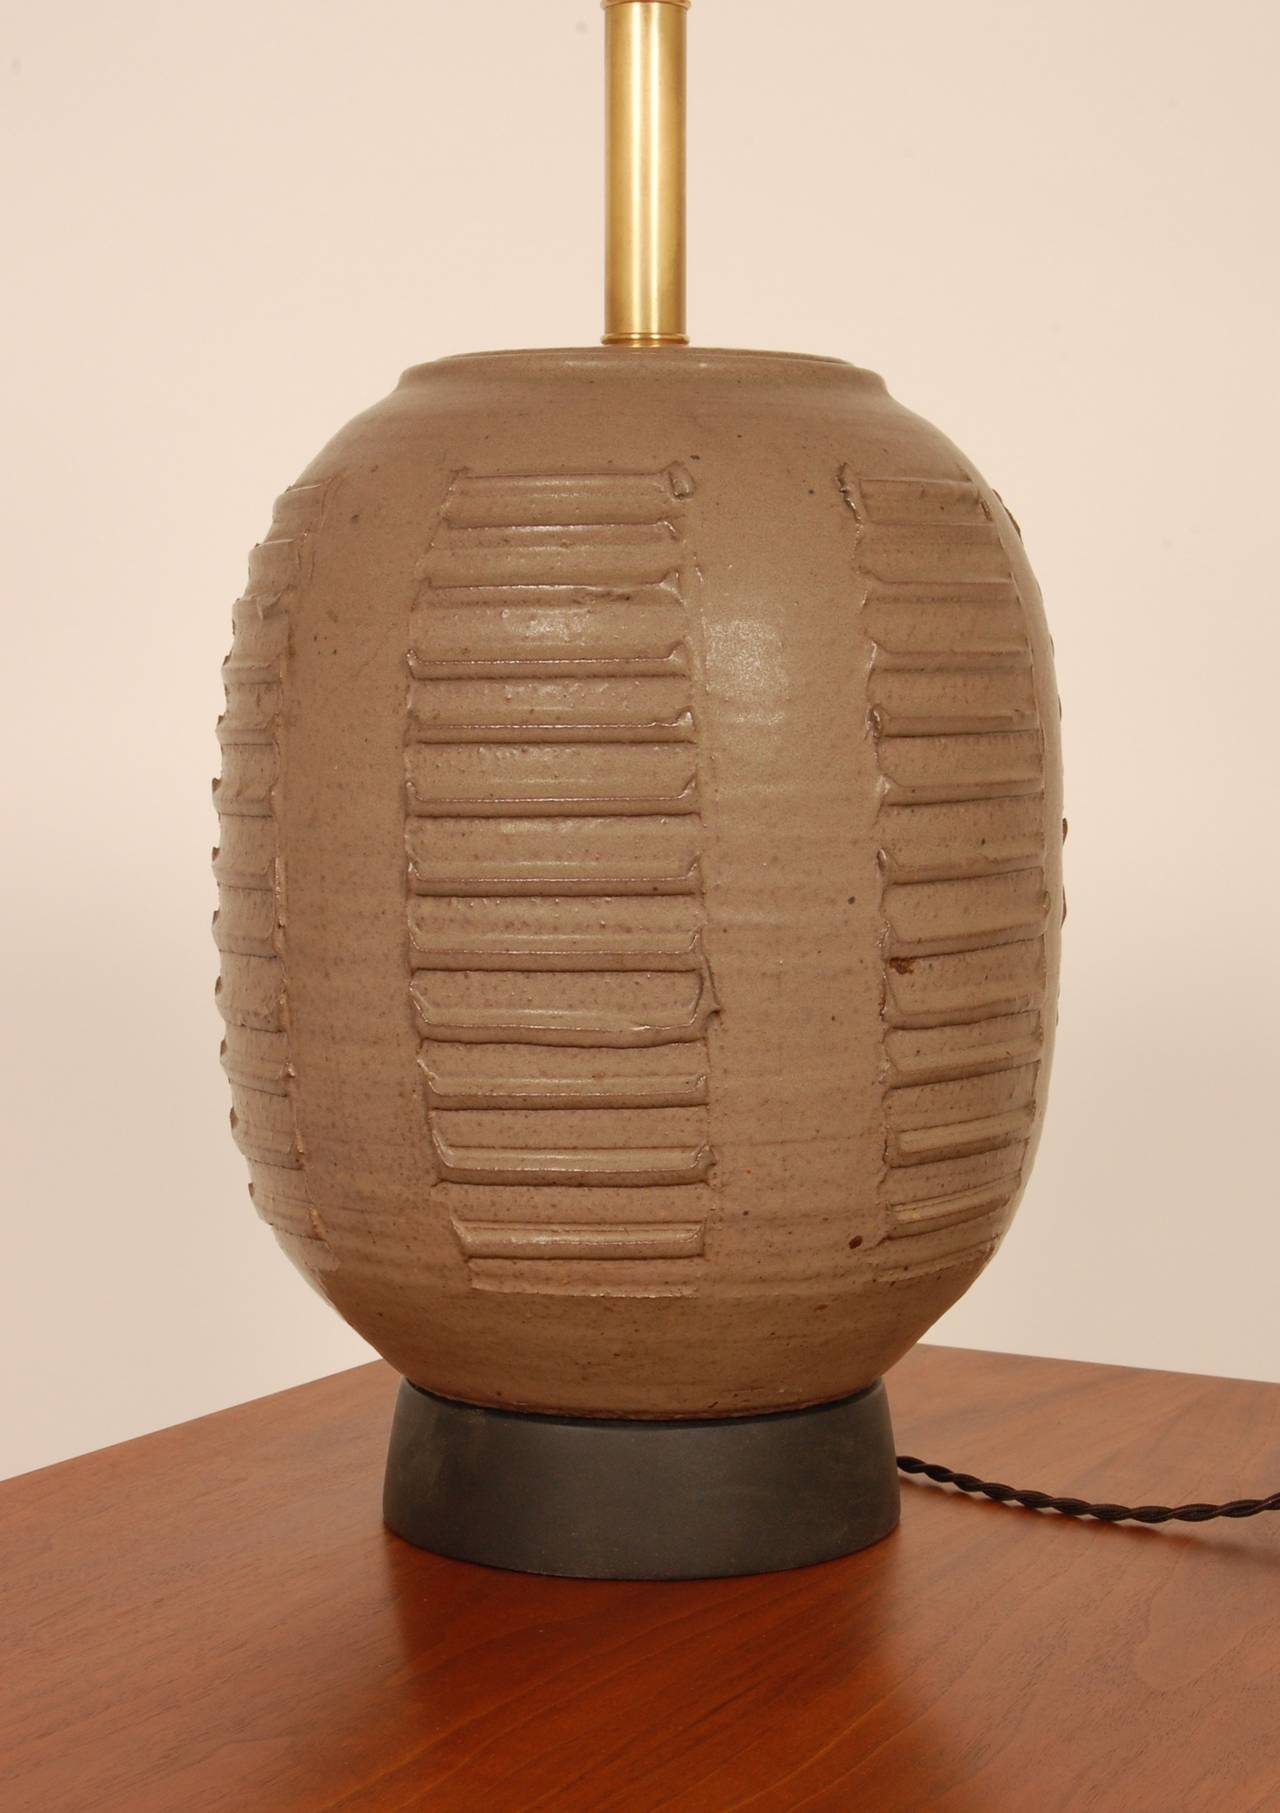 Hand thrown studio ceramic lamp by Bob Kinzie of California. Textured repeating patterns around the entire body of the lamp and has been newly rewired. The height measurement is from the base to the top of the socket.